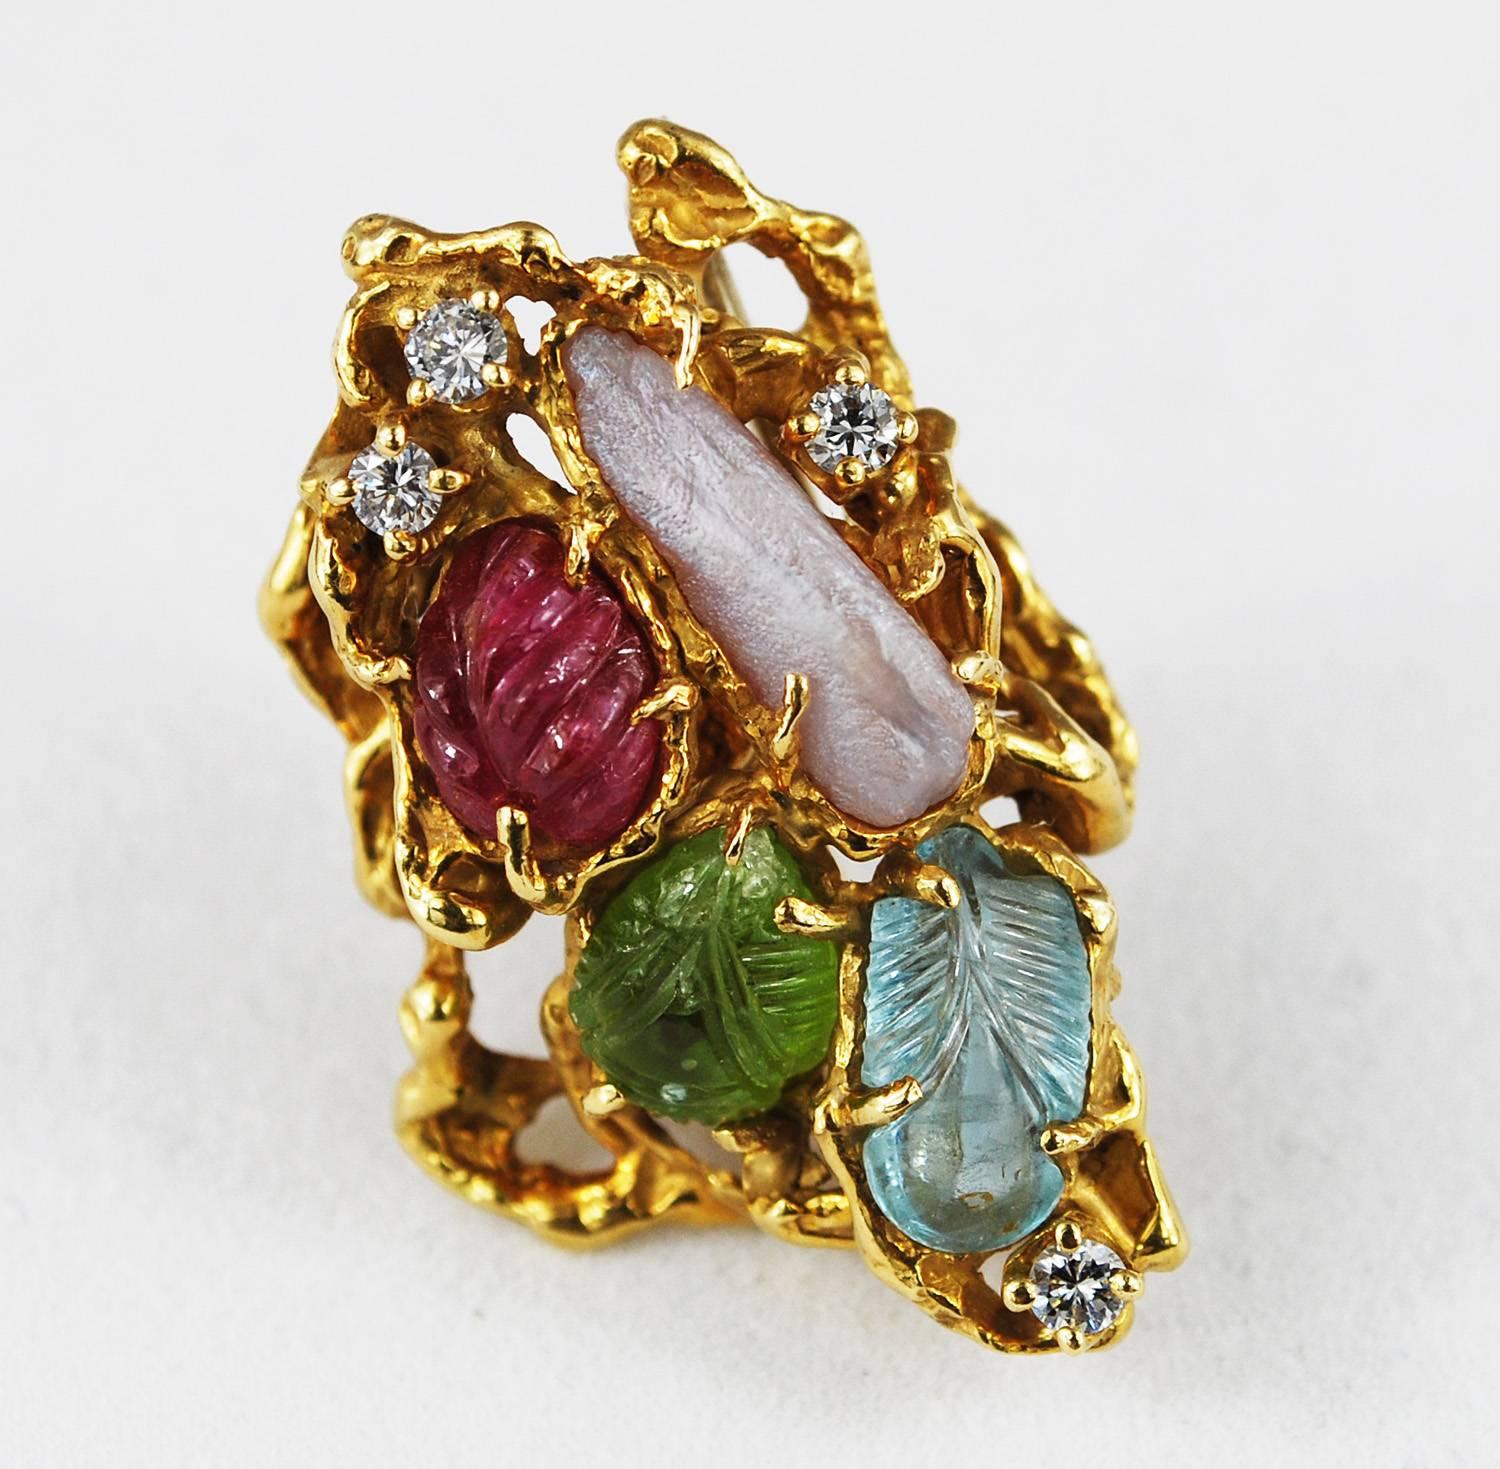 A unique convertible pendant/ brooch with carved ruby, aquamarine, peridot, and pearl and diamonds set in 18K gold made by mid century jewelry designer Arthur King.
Pendant is made in freeform design and has beautiful mix of colors and texture -